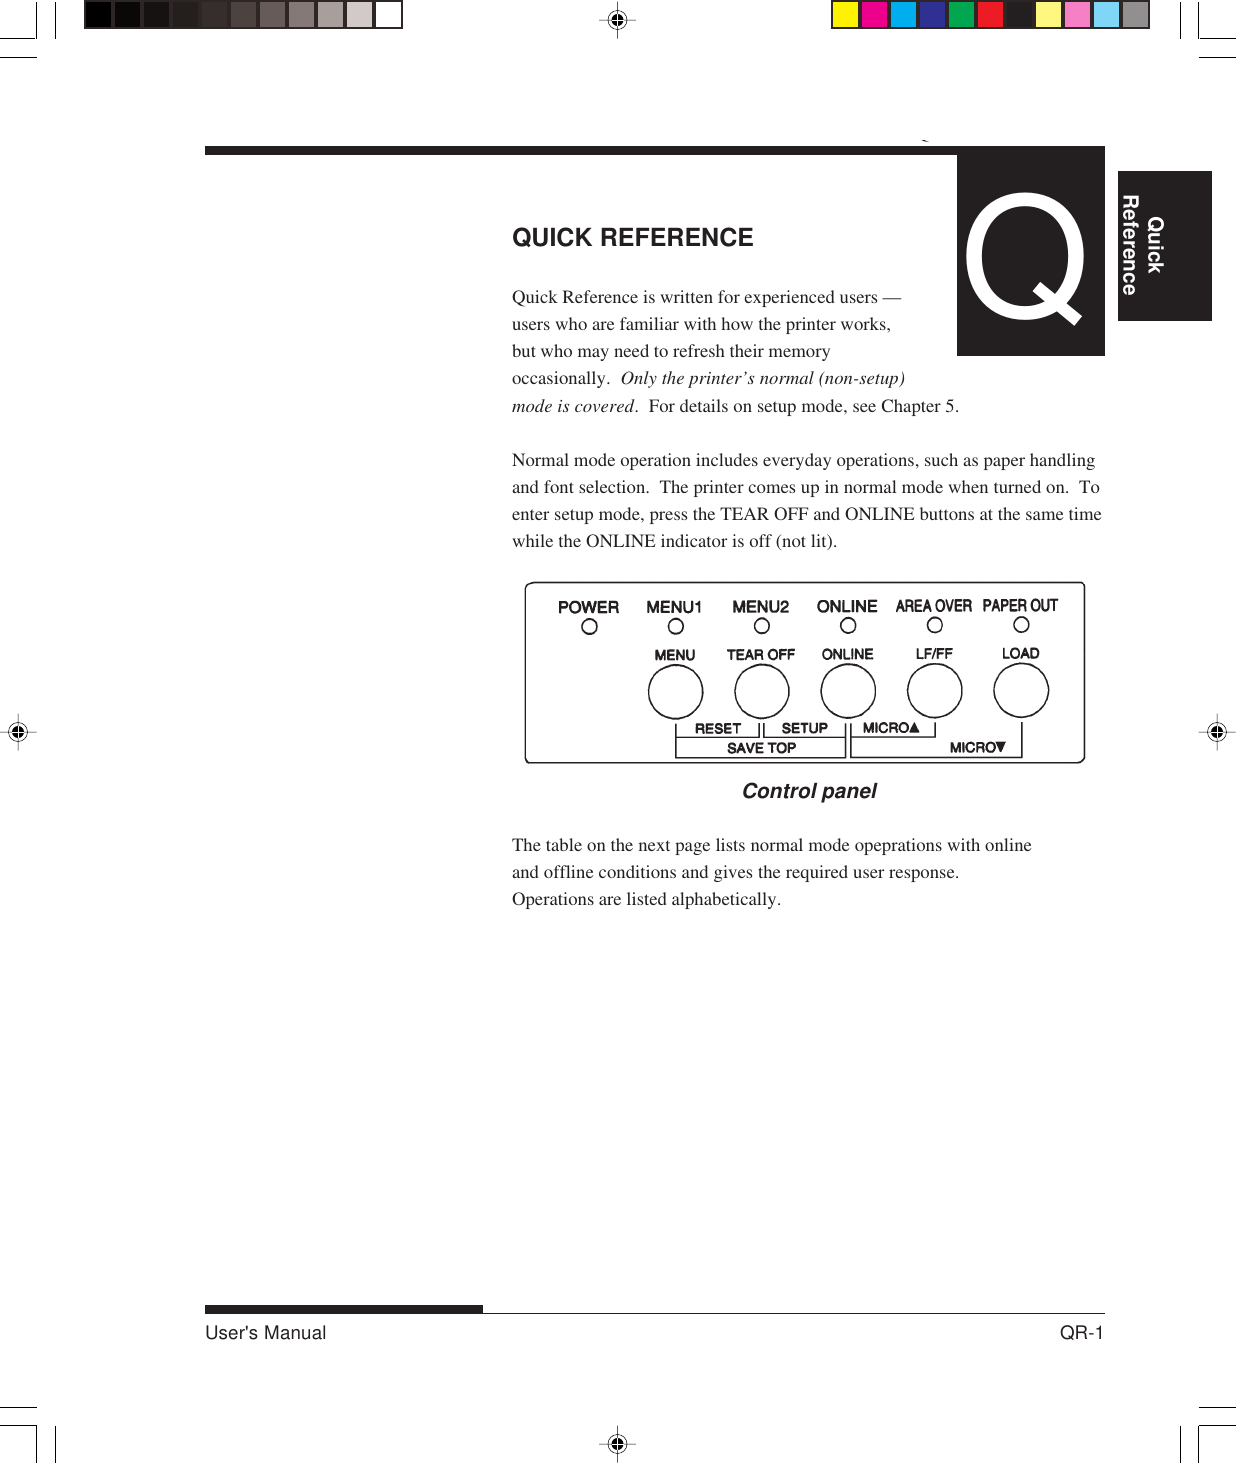 QUICK REFERENCEUser&apos;s Manual QR-1QuickReference Introduction Setting Up PaperHandling Printing Setup ModeQUICK REFERENCEQuick Reference is written for experienced users —users who are familiar with how the printer works,but who may need to refresh their memoryoccasionally.  Only the printer’s normal (non-setup)mode is covered.  For details on setup mode, see Chapter 5.Normal mode operation includes everyday operations, such as paper handlingand font selection.  The printer comes up in normal mode when turned on.  Toenter setup mode, press the TEAR OFF and ONLINE buttons at the same timewhile the ONLINE indicator is off (not lit).Control panelThe table on the next page lists normal mode opeprations with onlineand offline conditions and gives the required user response.Operations are listed alphabetically.Q